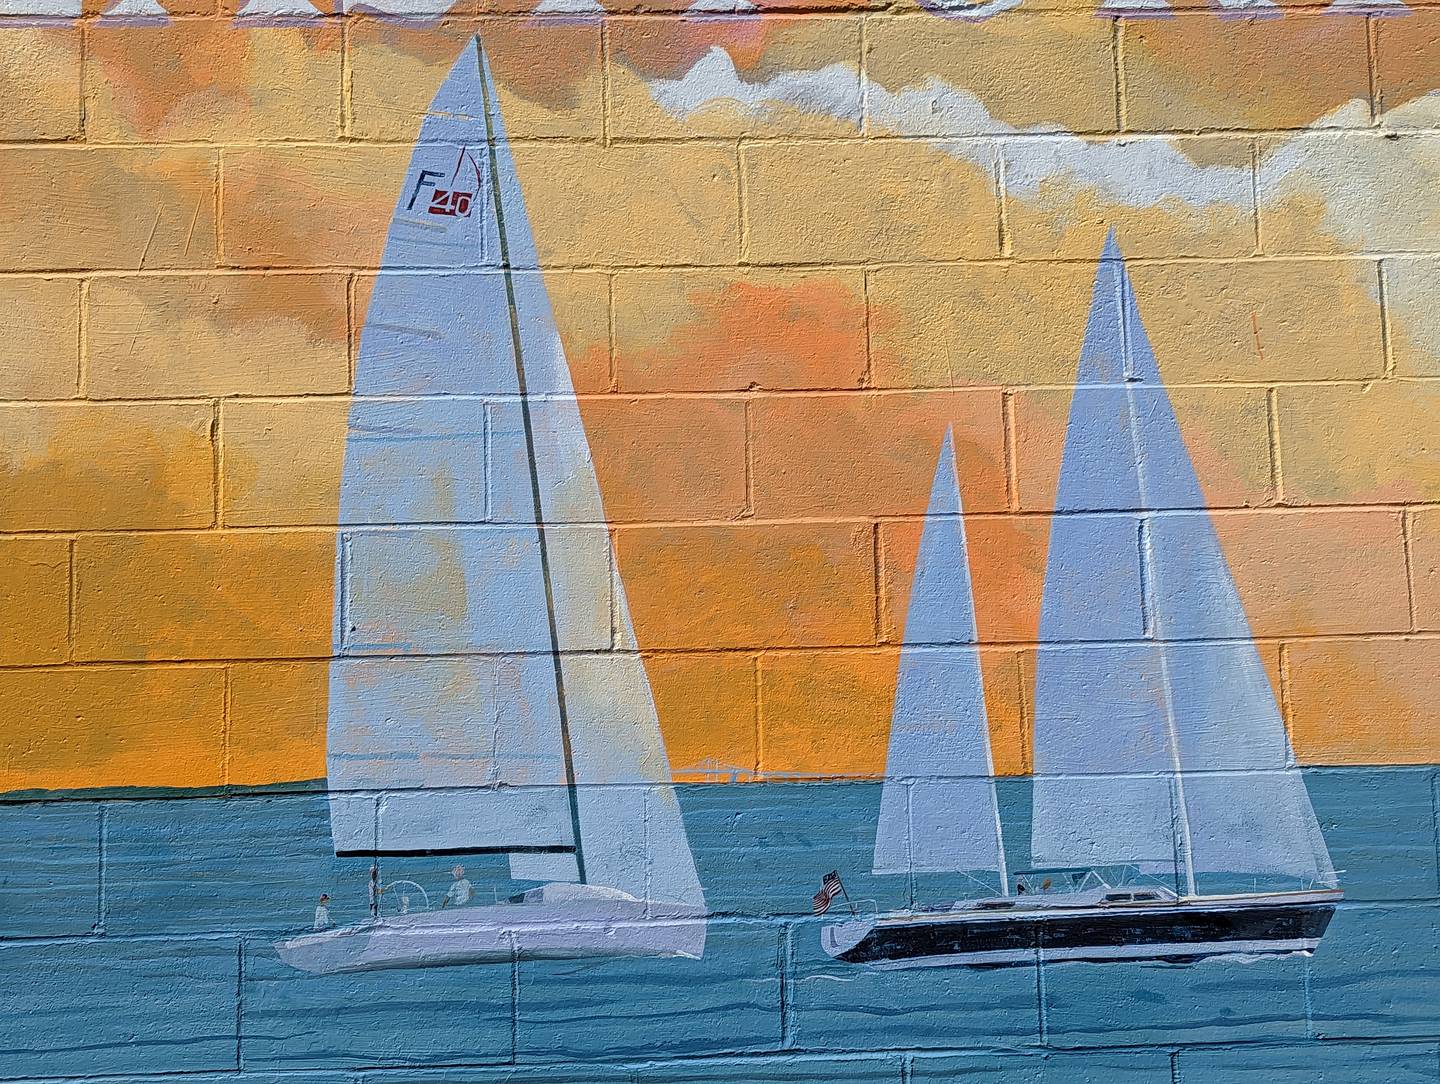 A section of Cindy Holden Fletcher's Eastport anniversary mural depicts sailboats against an orange sunset.